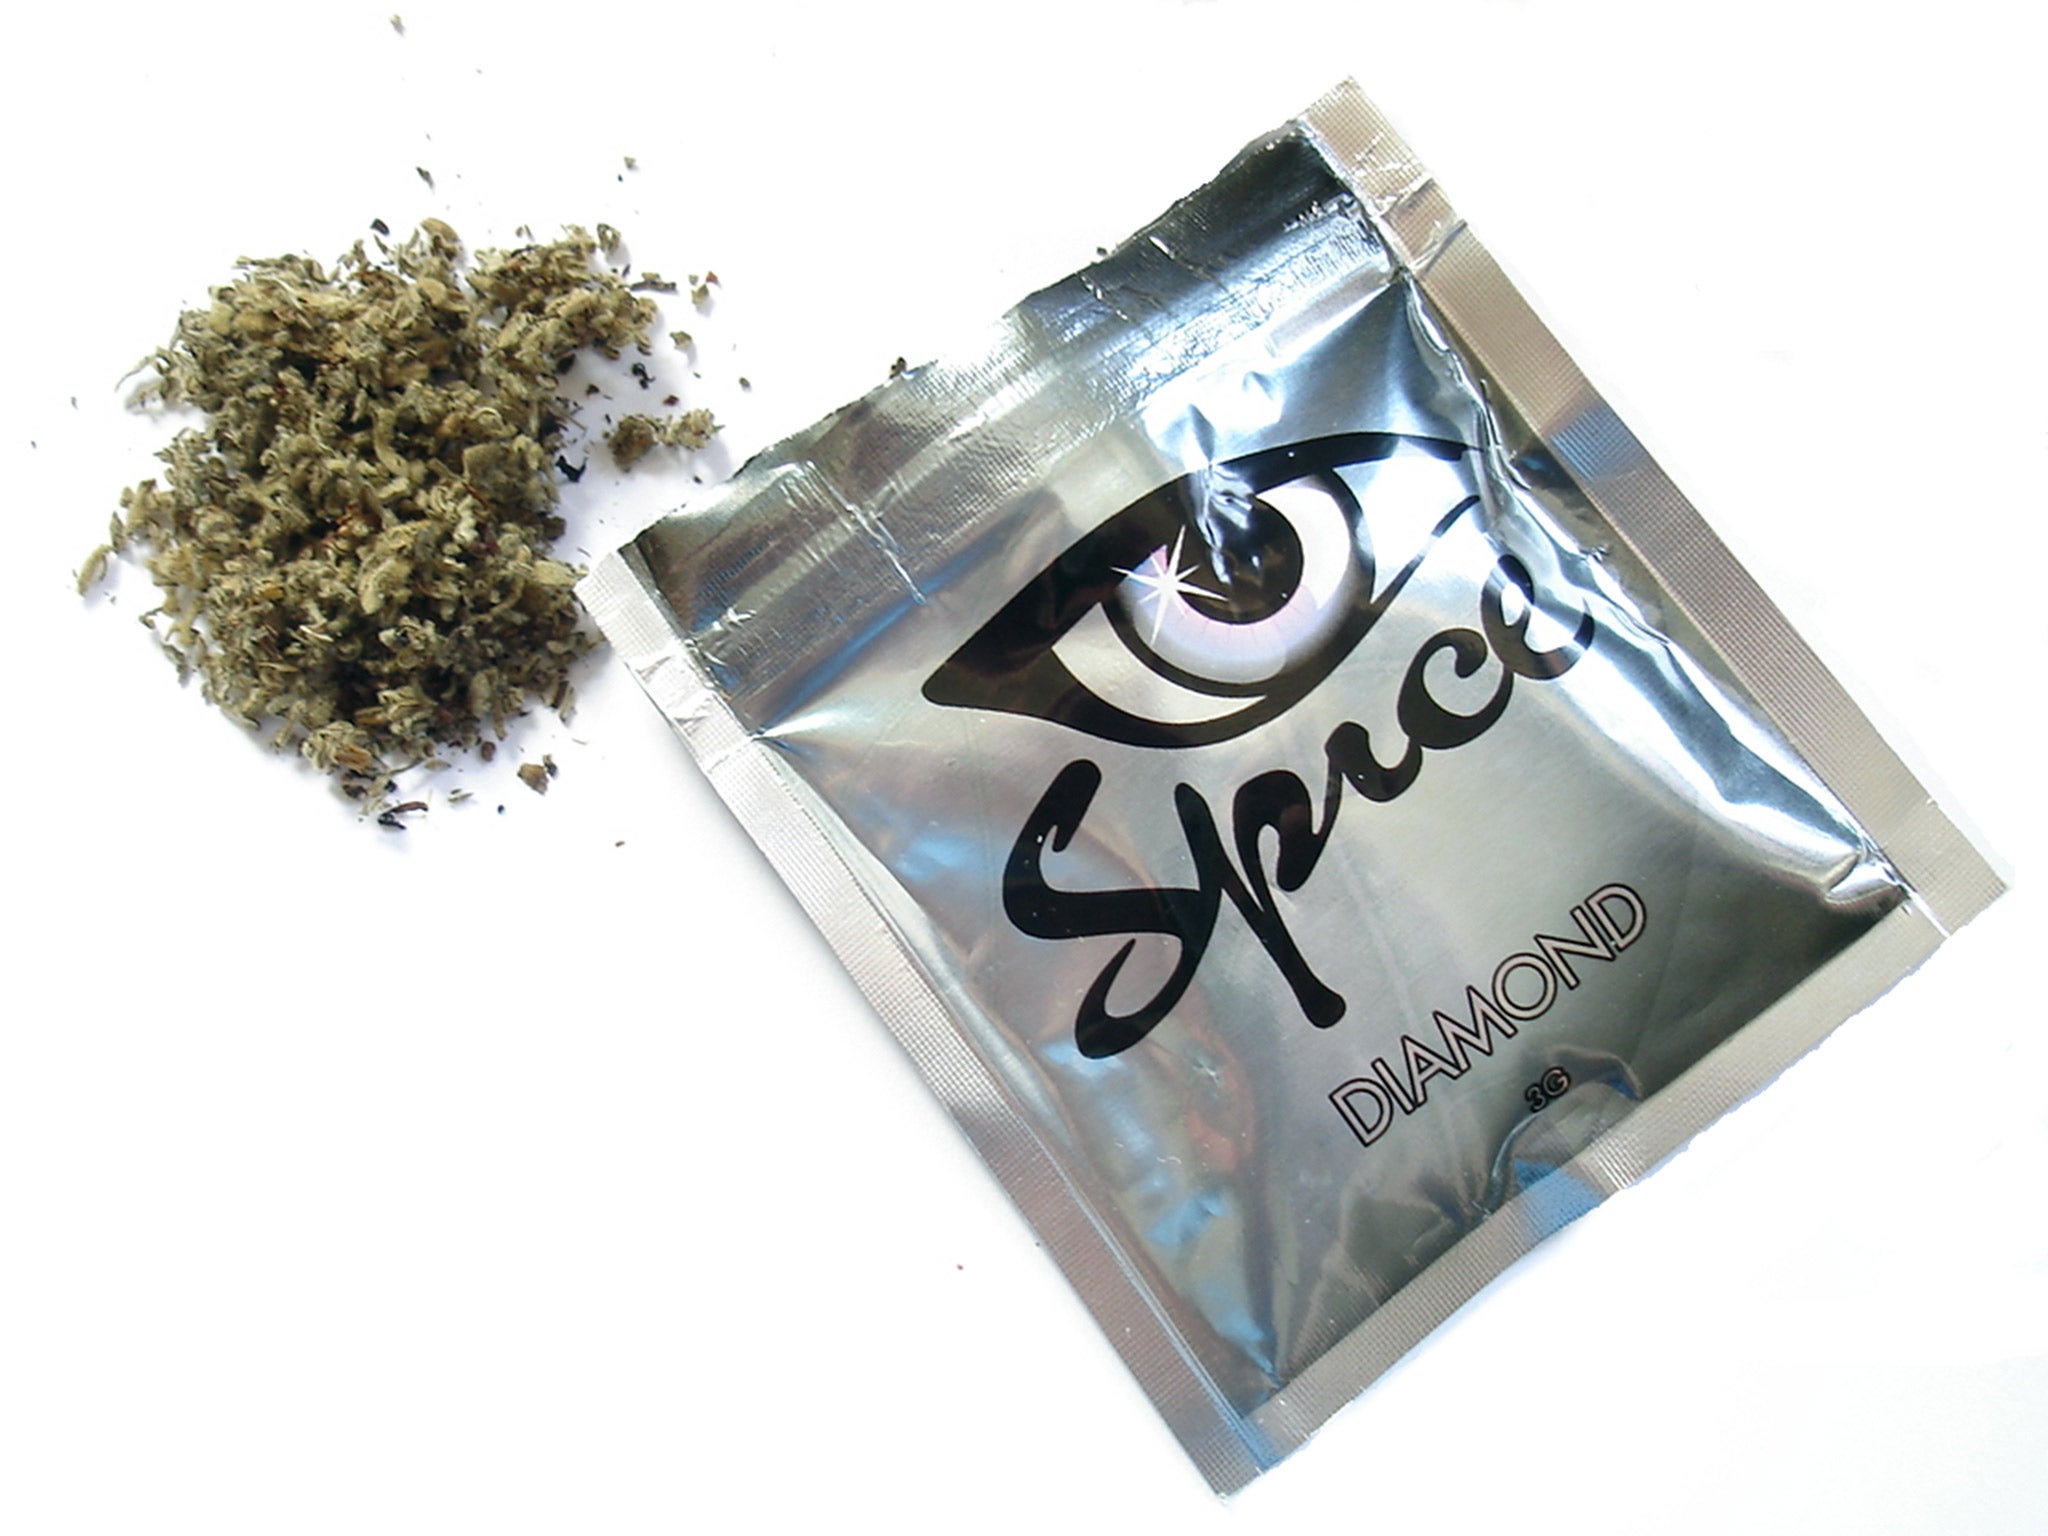 Spice is one of many synthetic cannabis brands currently available